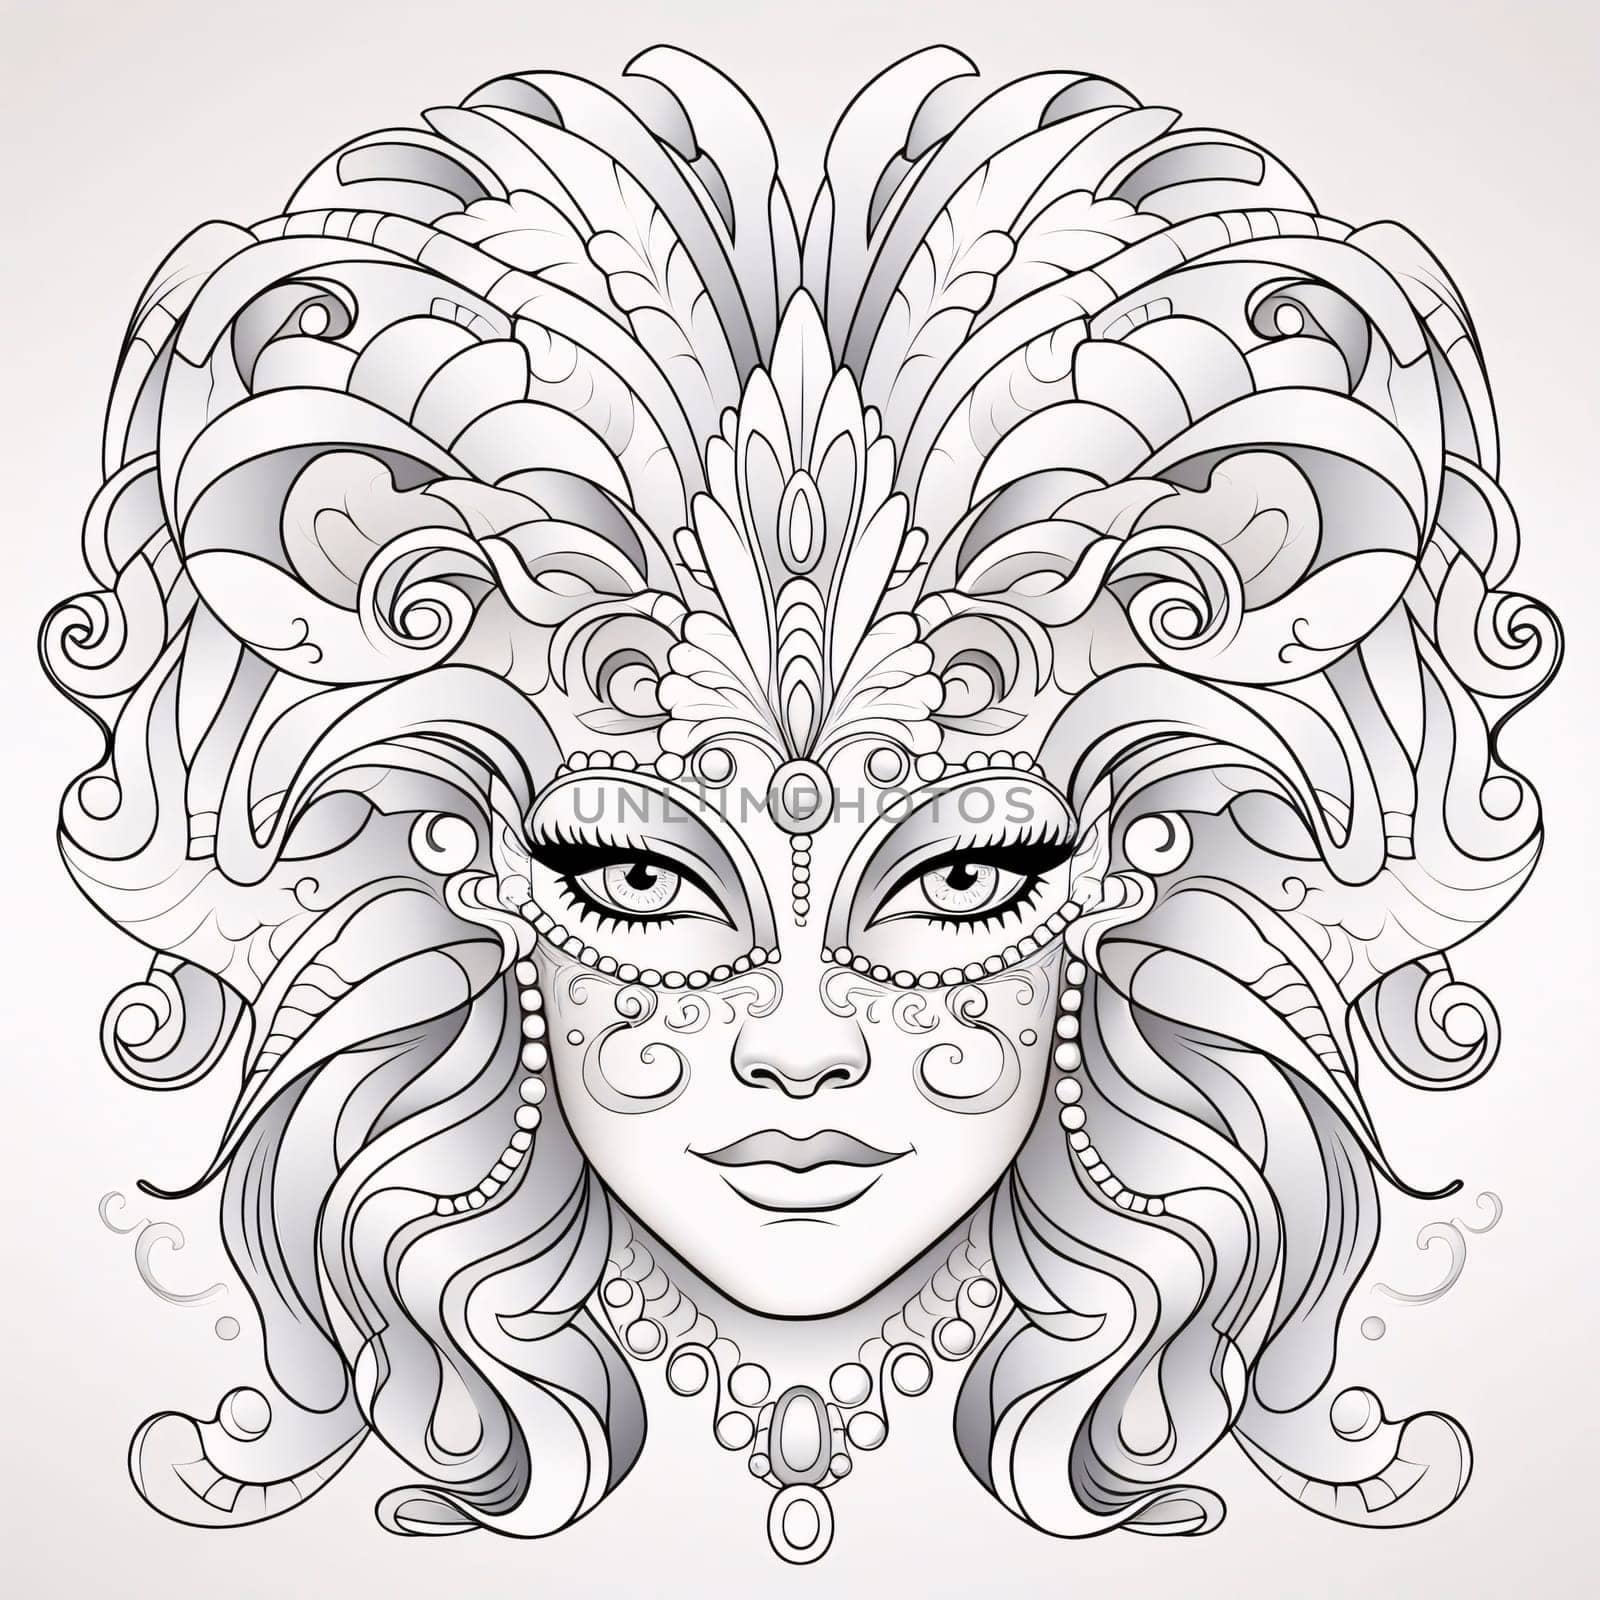 Black and white coloring sheet, carnival mask with decorations. Carnival outfits, masks and decorations. by ThemesS